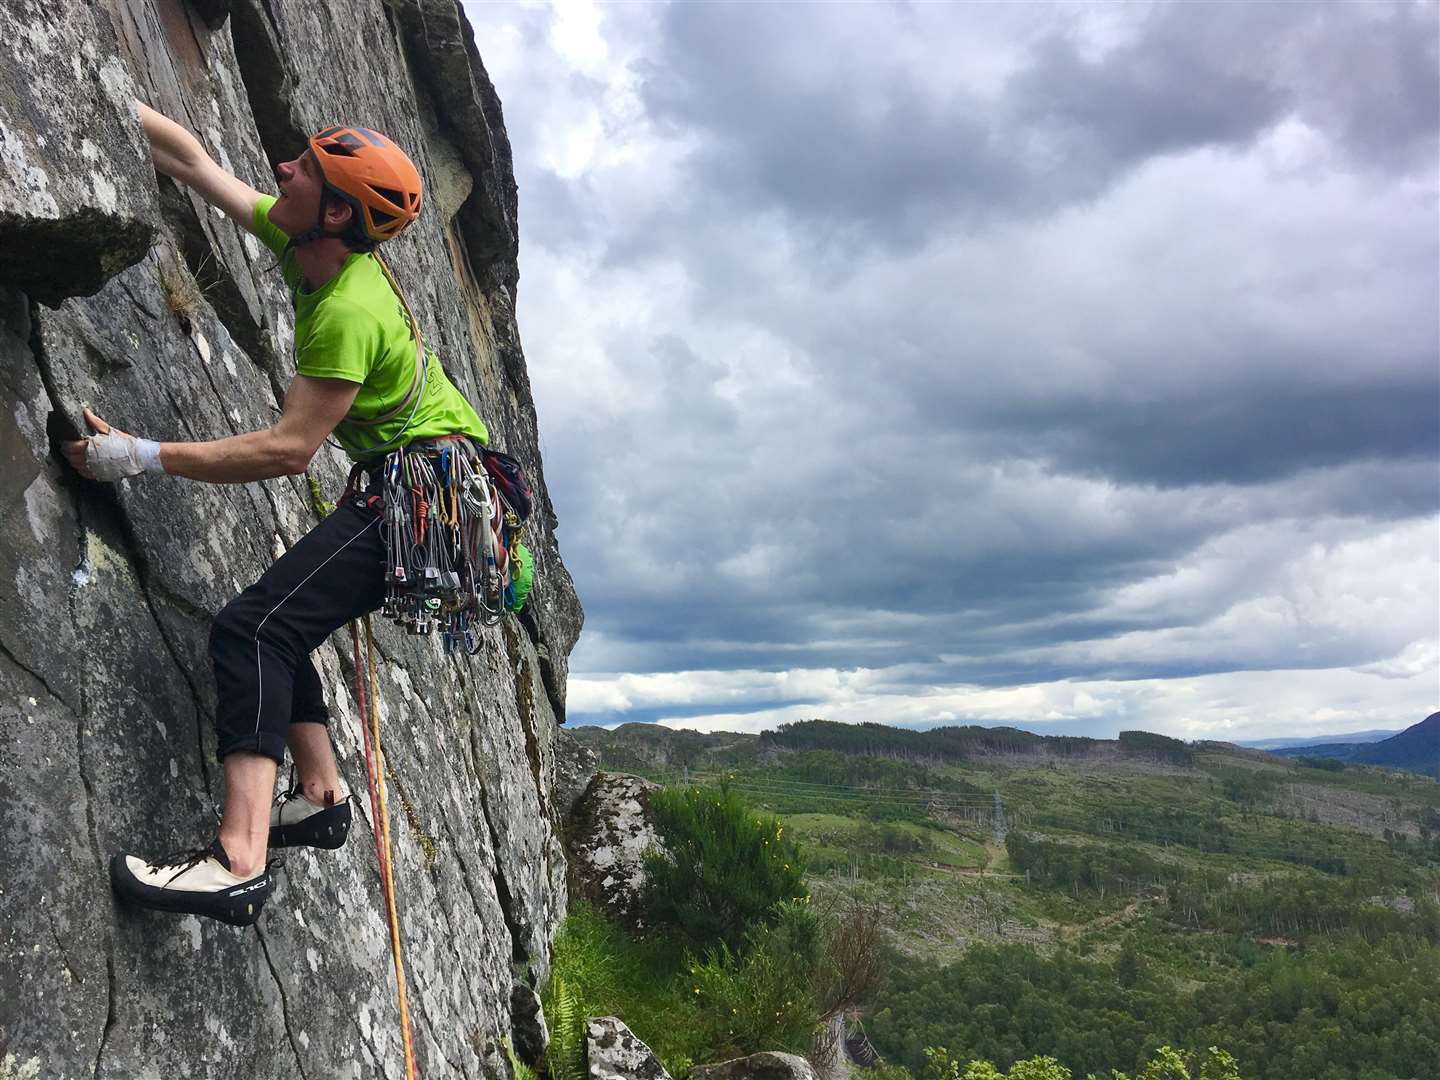 Climbing is just one of many pursuits that the Scottish Outdoor Access Code helps to sustain.